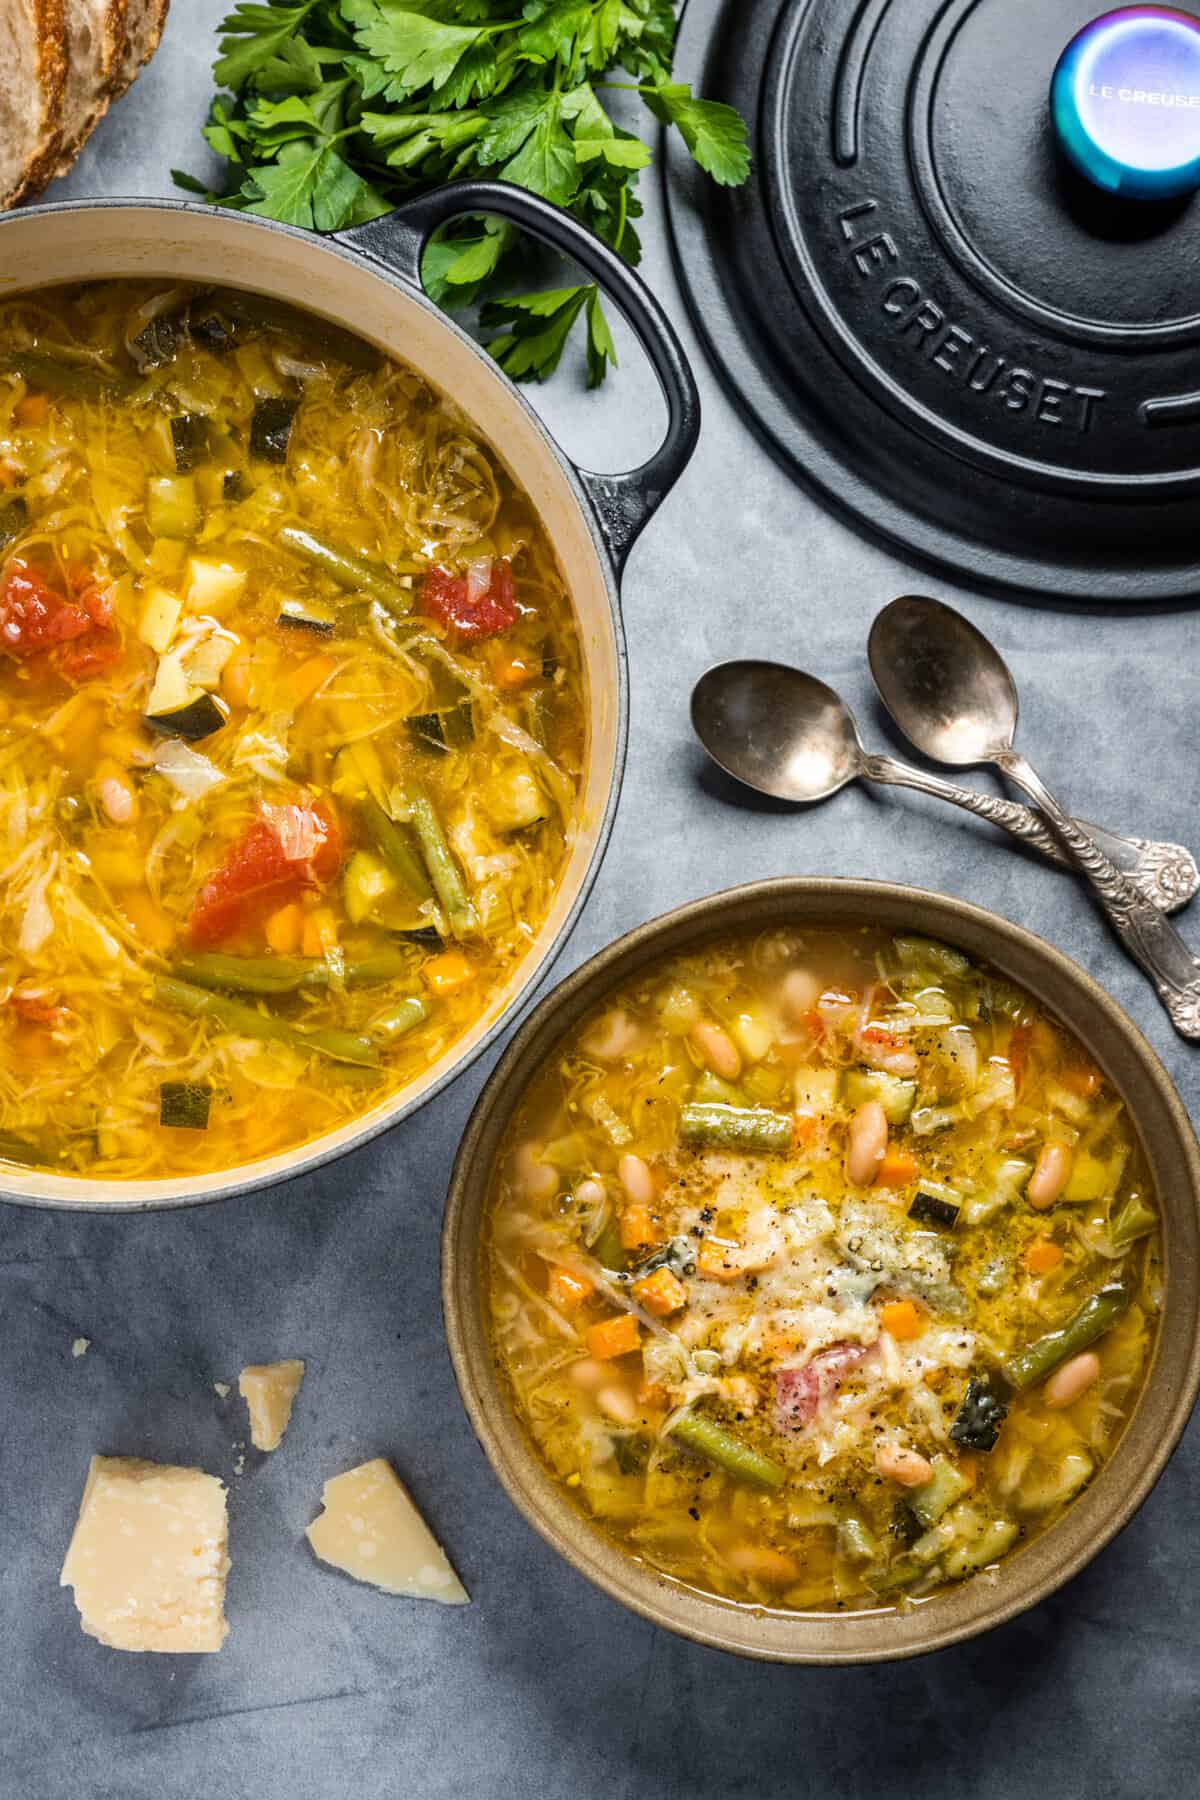 Try this Veggie-Packed Minestrone Soup Recipe from Rancho Gordo